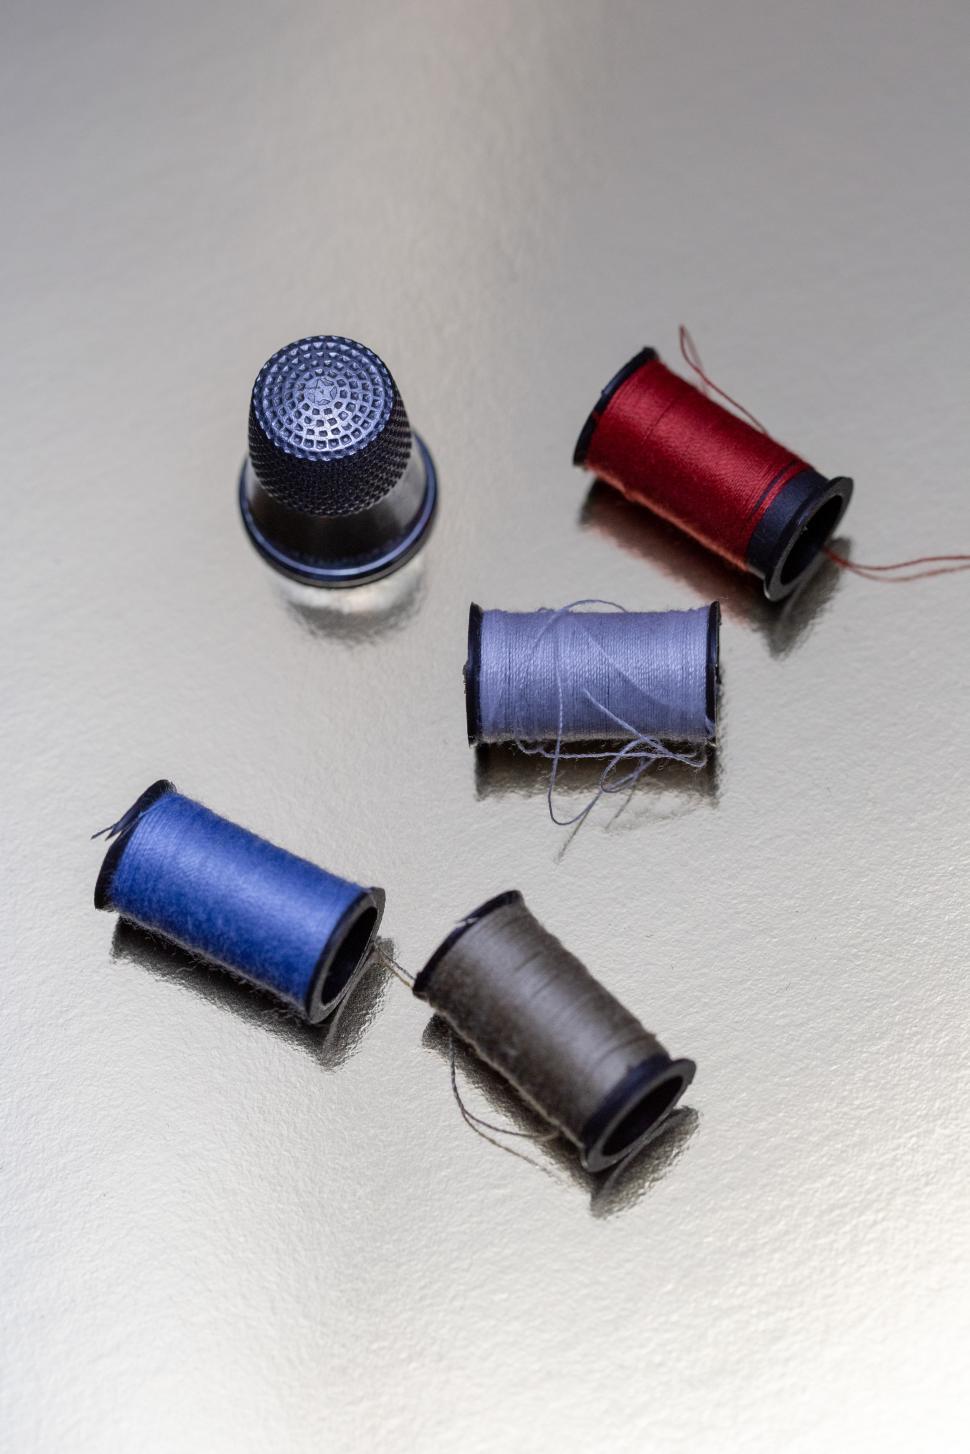 Free Image of A group of spools of thread and thimble 